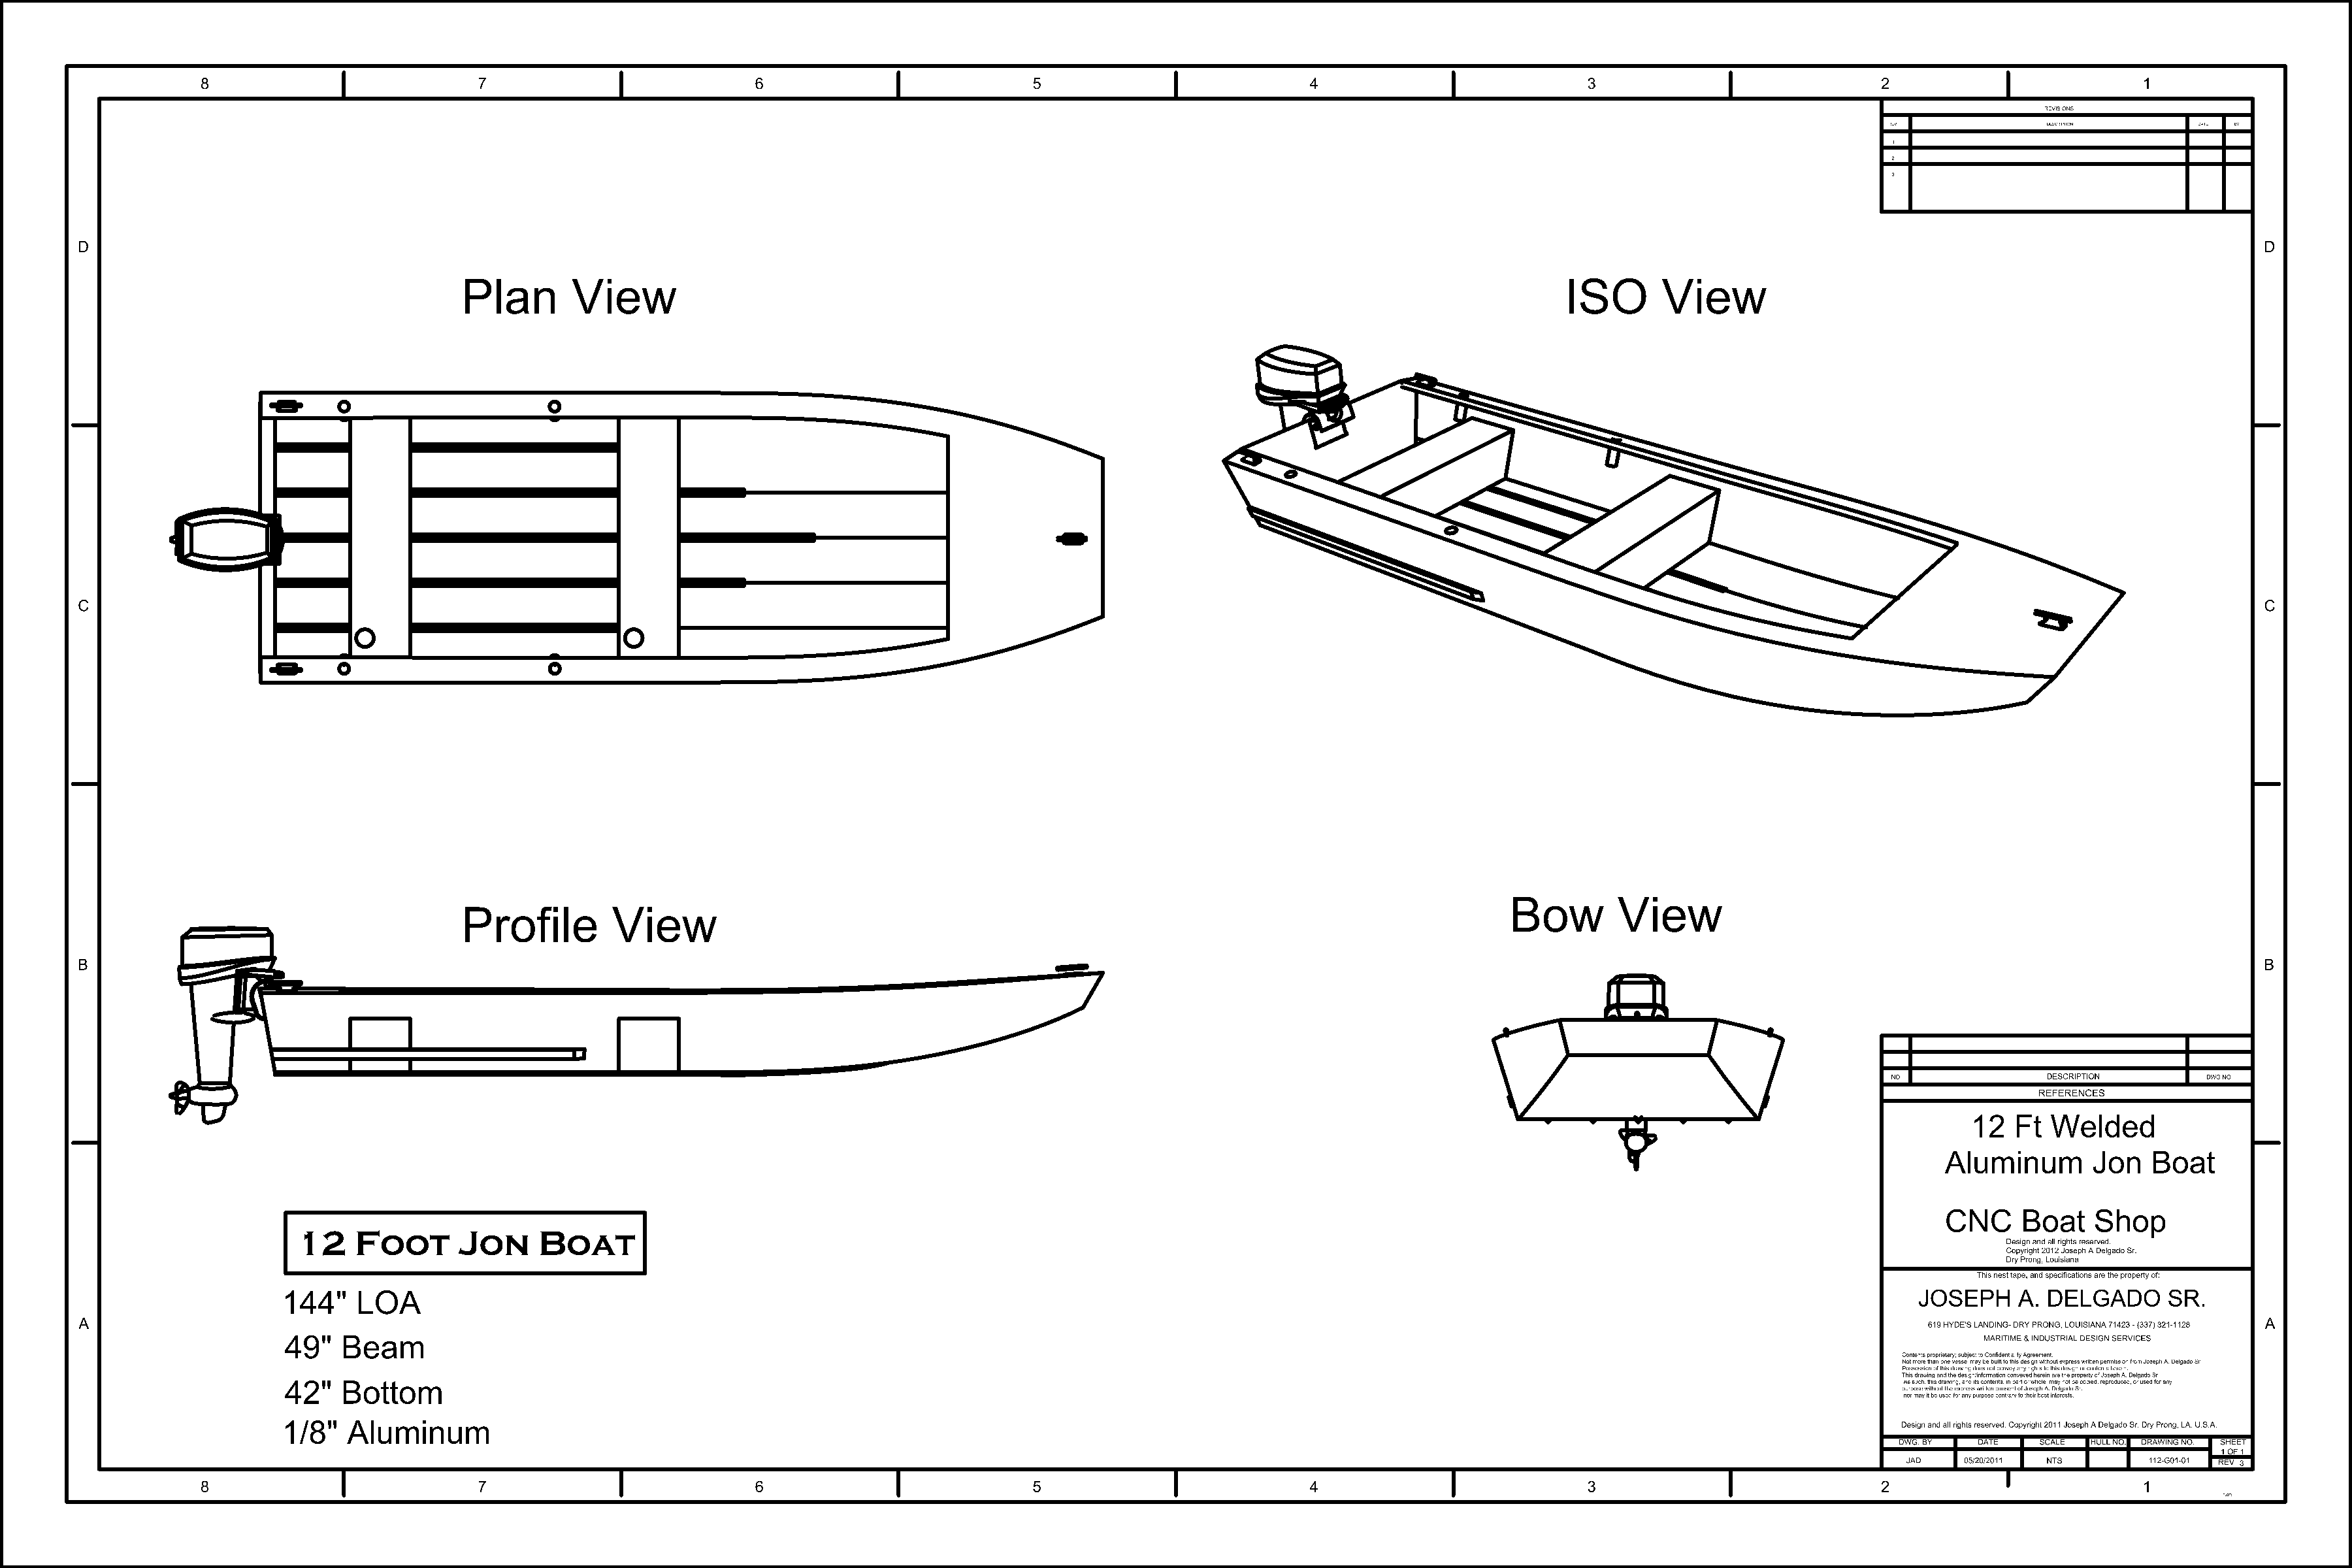 Boat Plans Jon Boat Plans Free | How To and DIY Building Plans Online Class